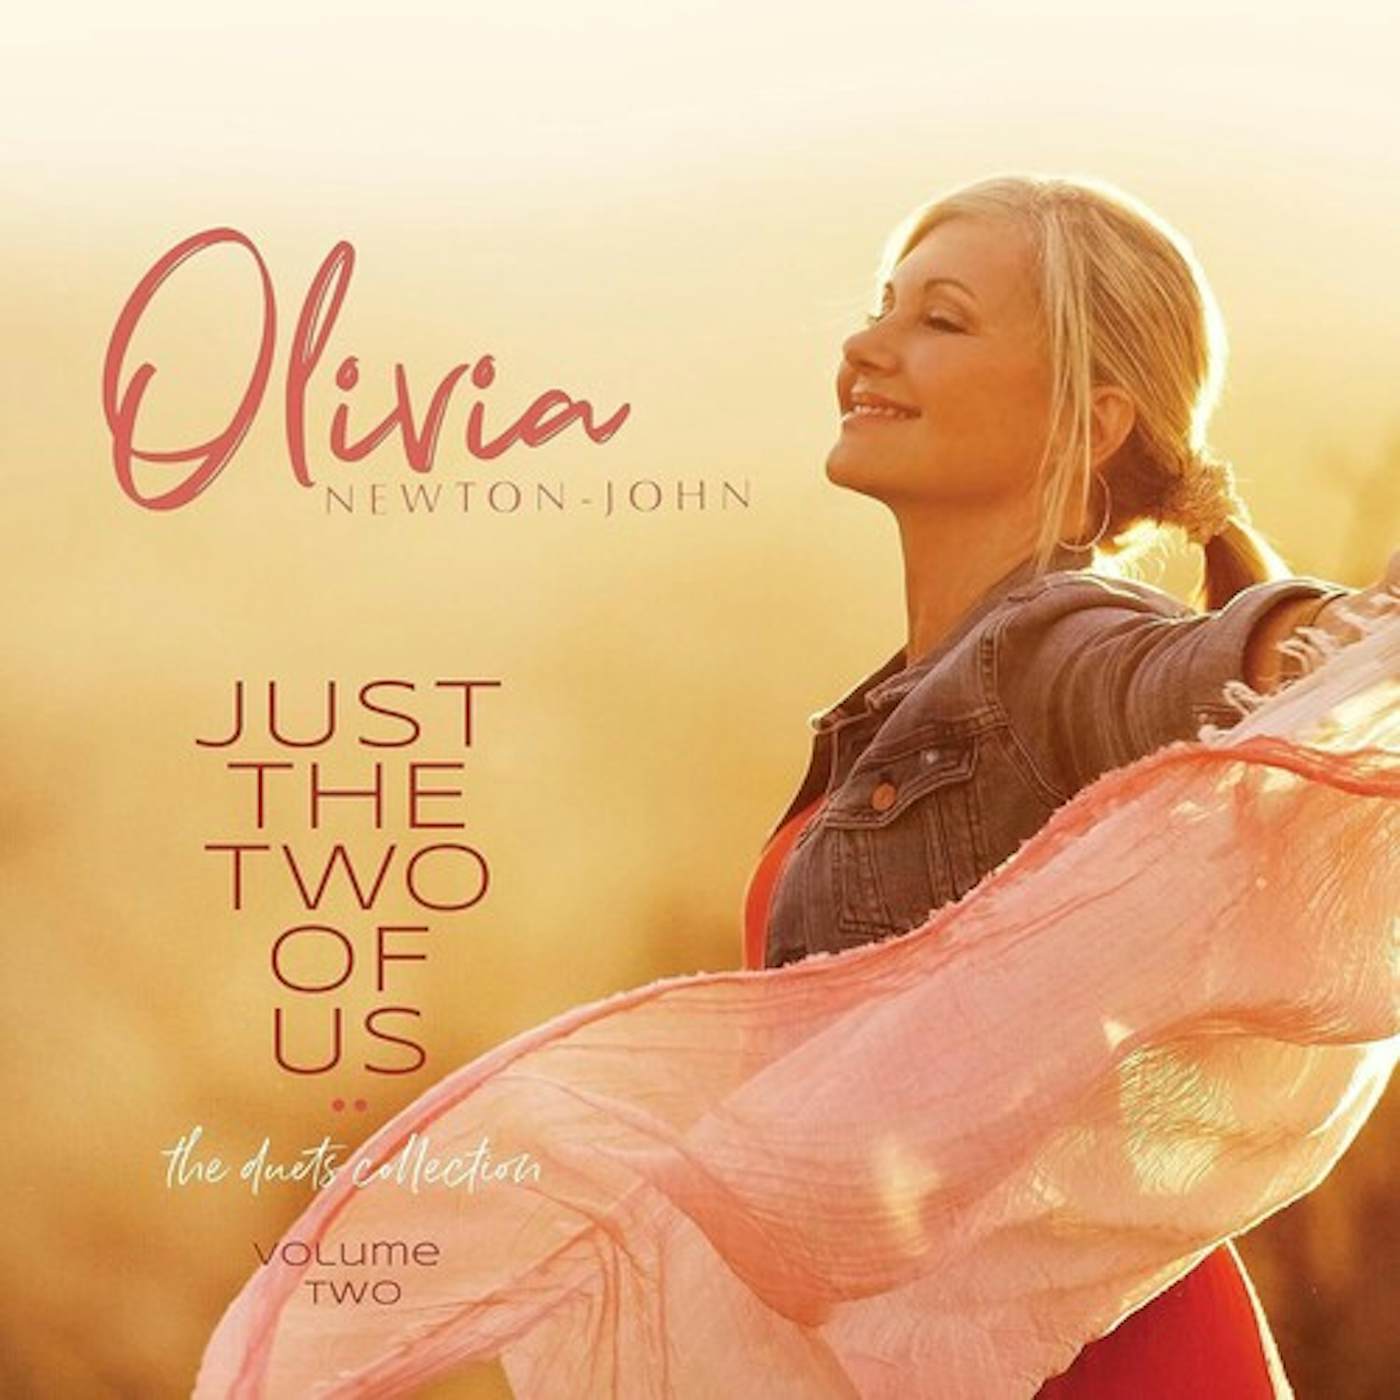 Olivia Newton-John JUST THE TWO OF US: THE DUETS COLLECTION (VOL 2) CD